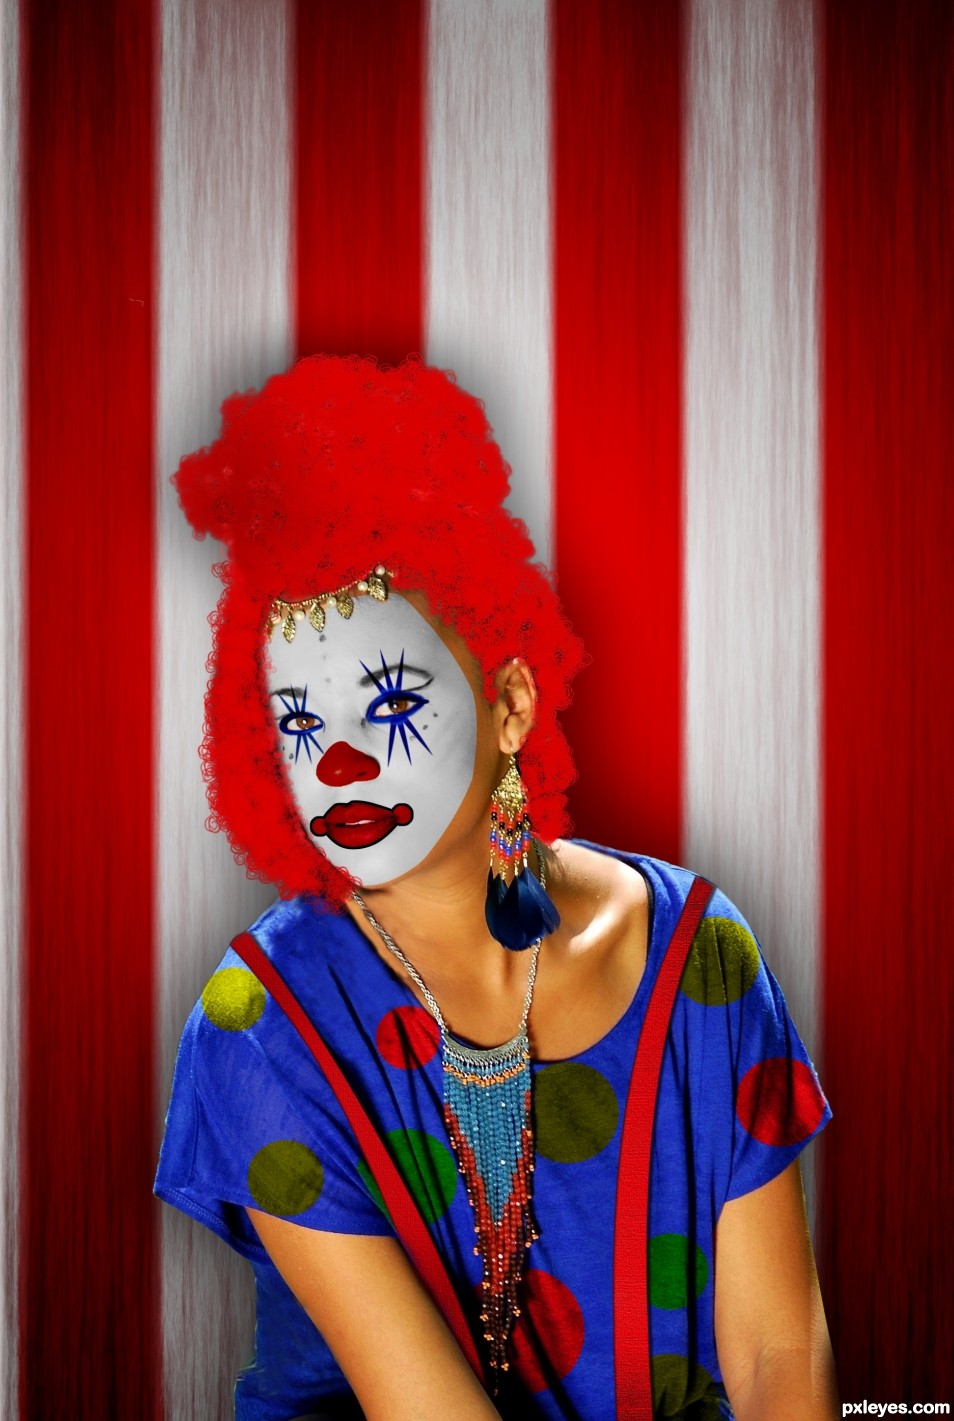 Creation of clowny look: Final Result